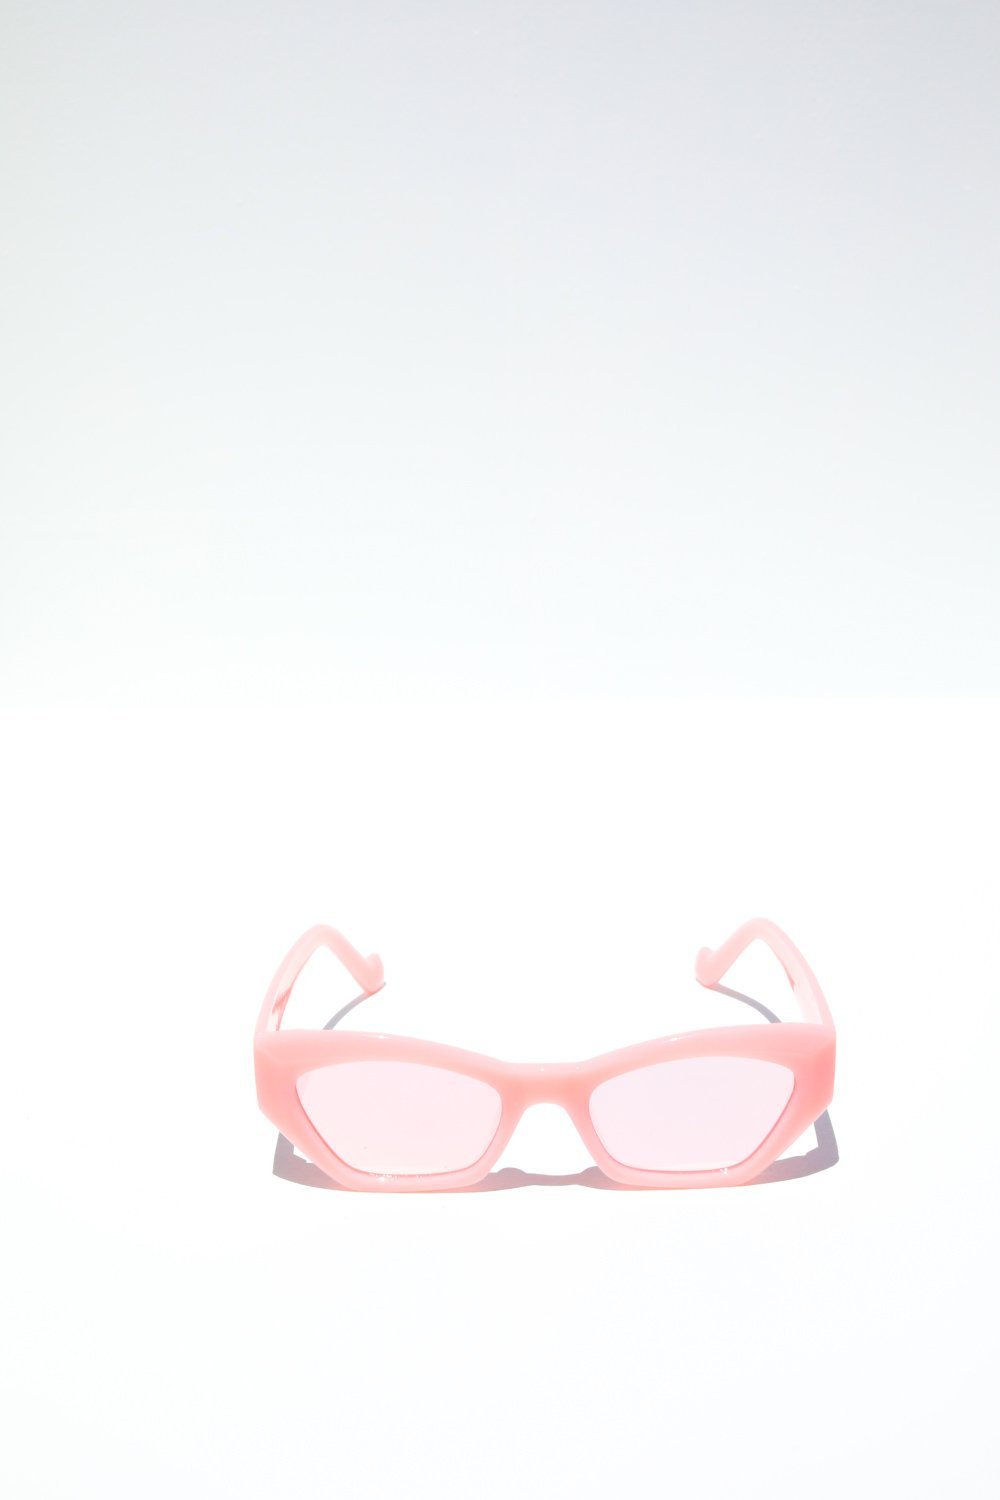 Breezy Chunky Frames Sunglasses Mulberry & Grand Pink with Pink Mirror 